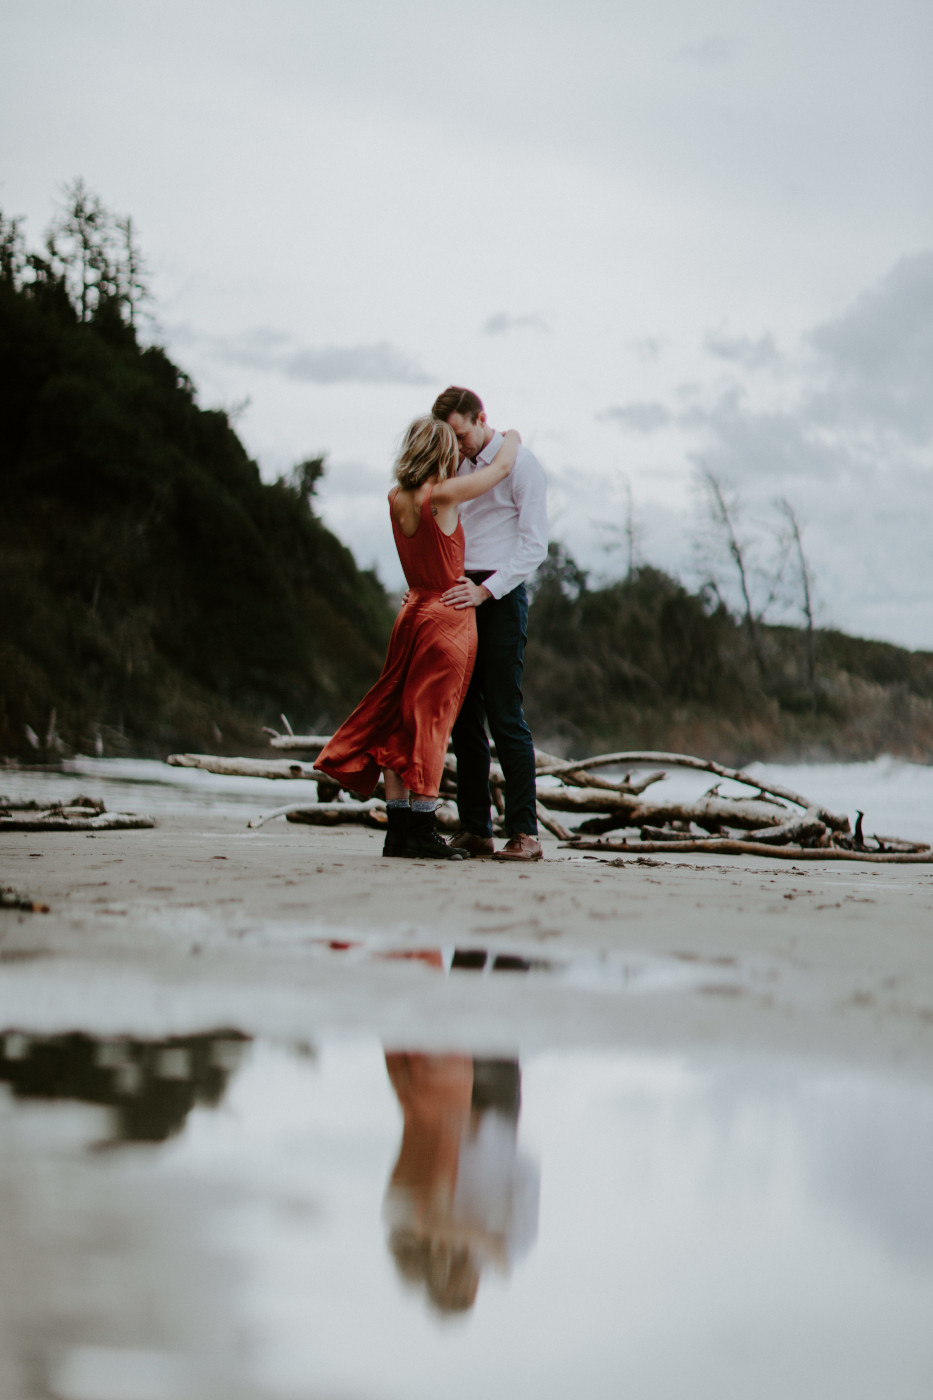 Chelsey and Billy share a moment on the beach. Elopement wedding photography at Cannon Beach by Sienna Plus Josh.